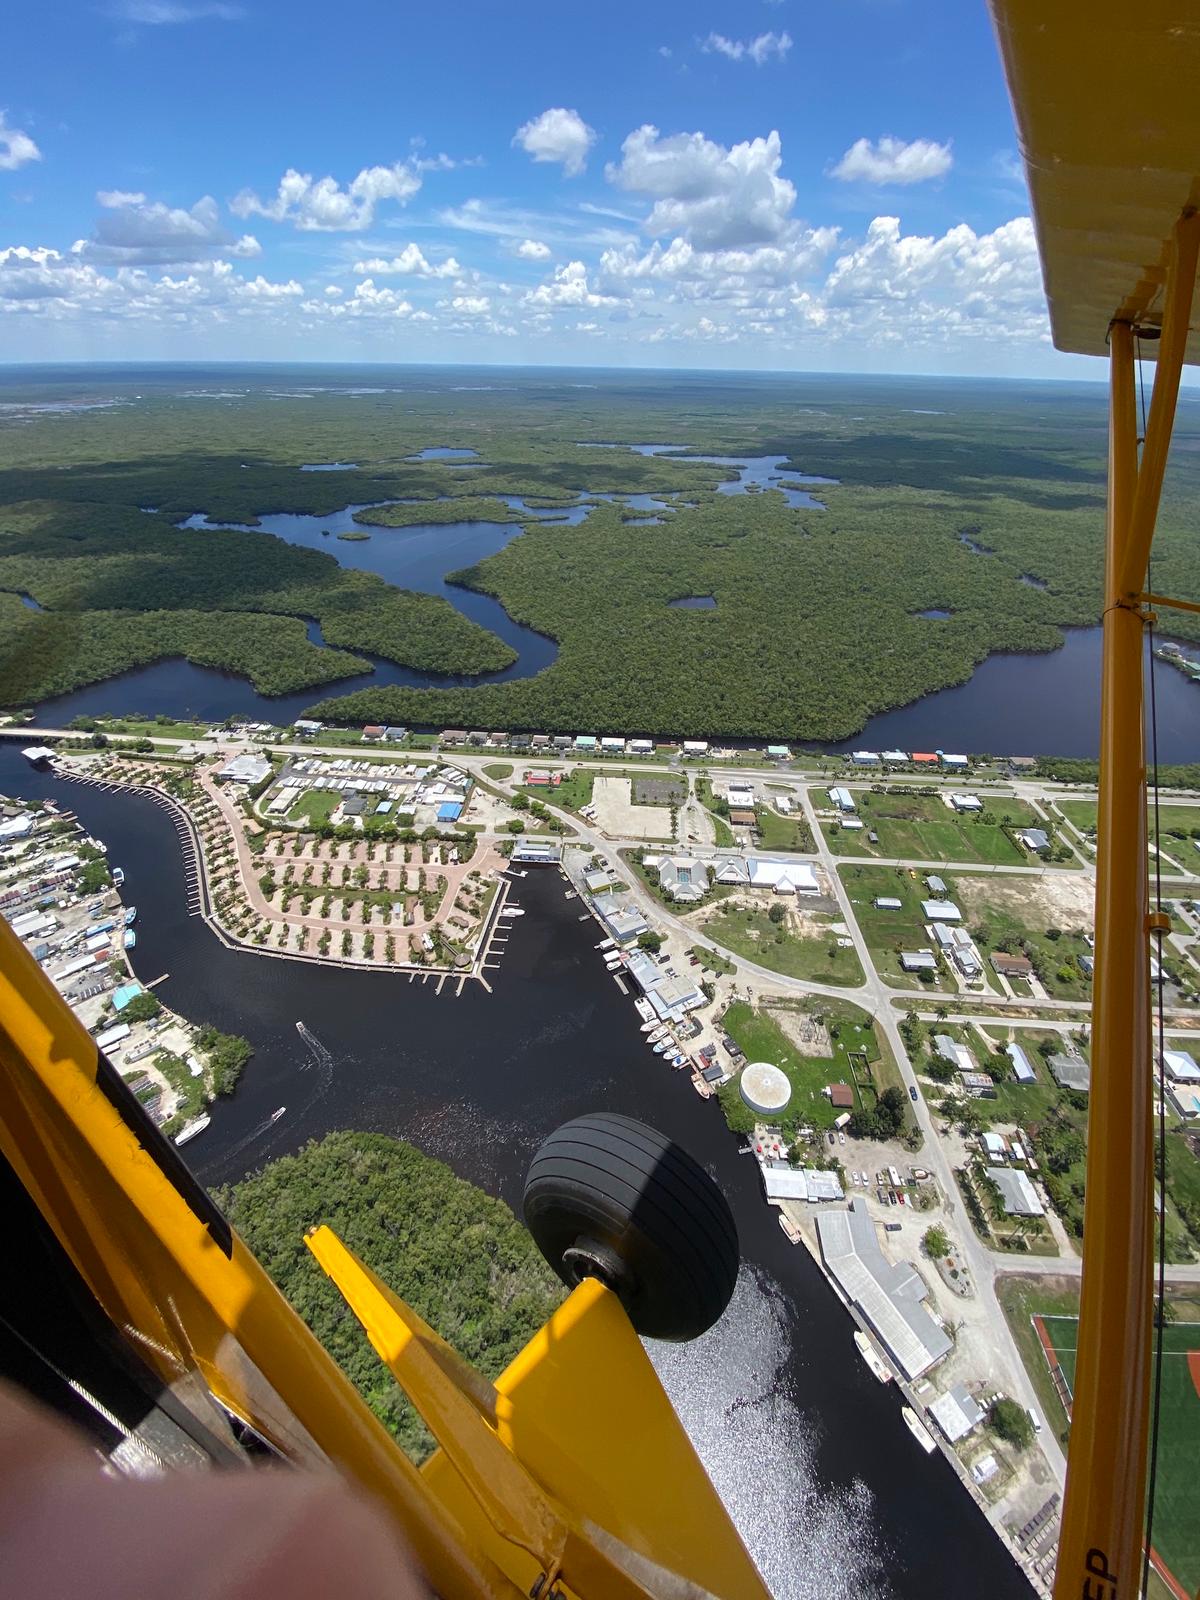 Approaching Everglades City by plane. The town spans just over one square mile in total area. (Skye Sherman)